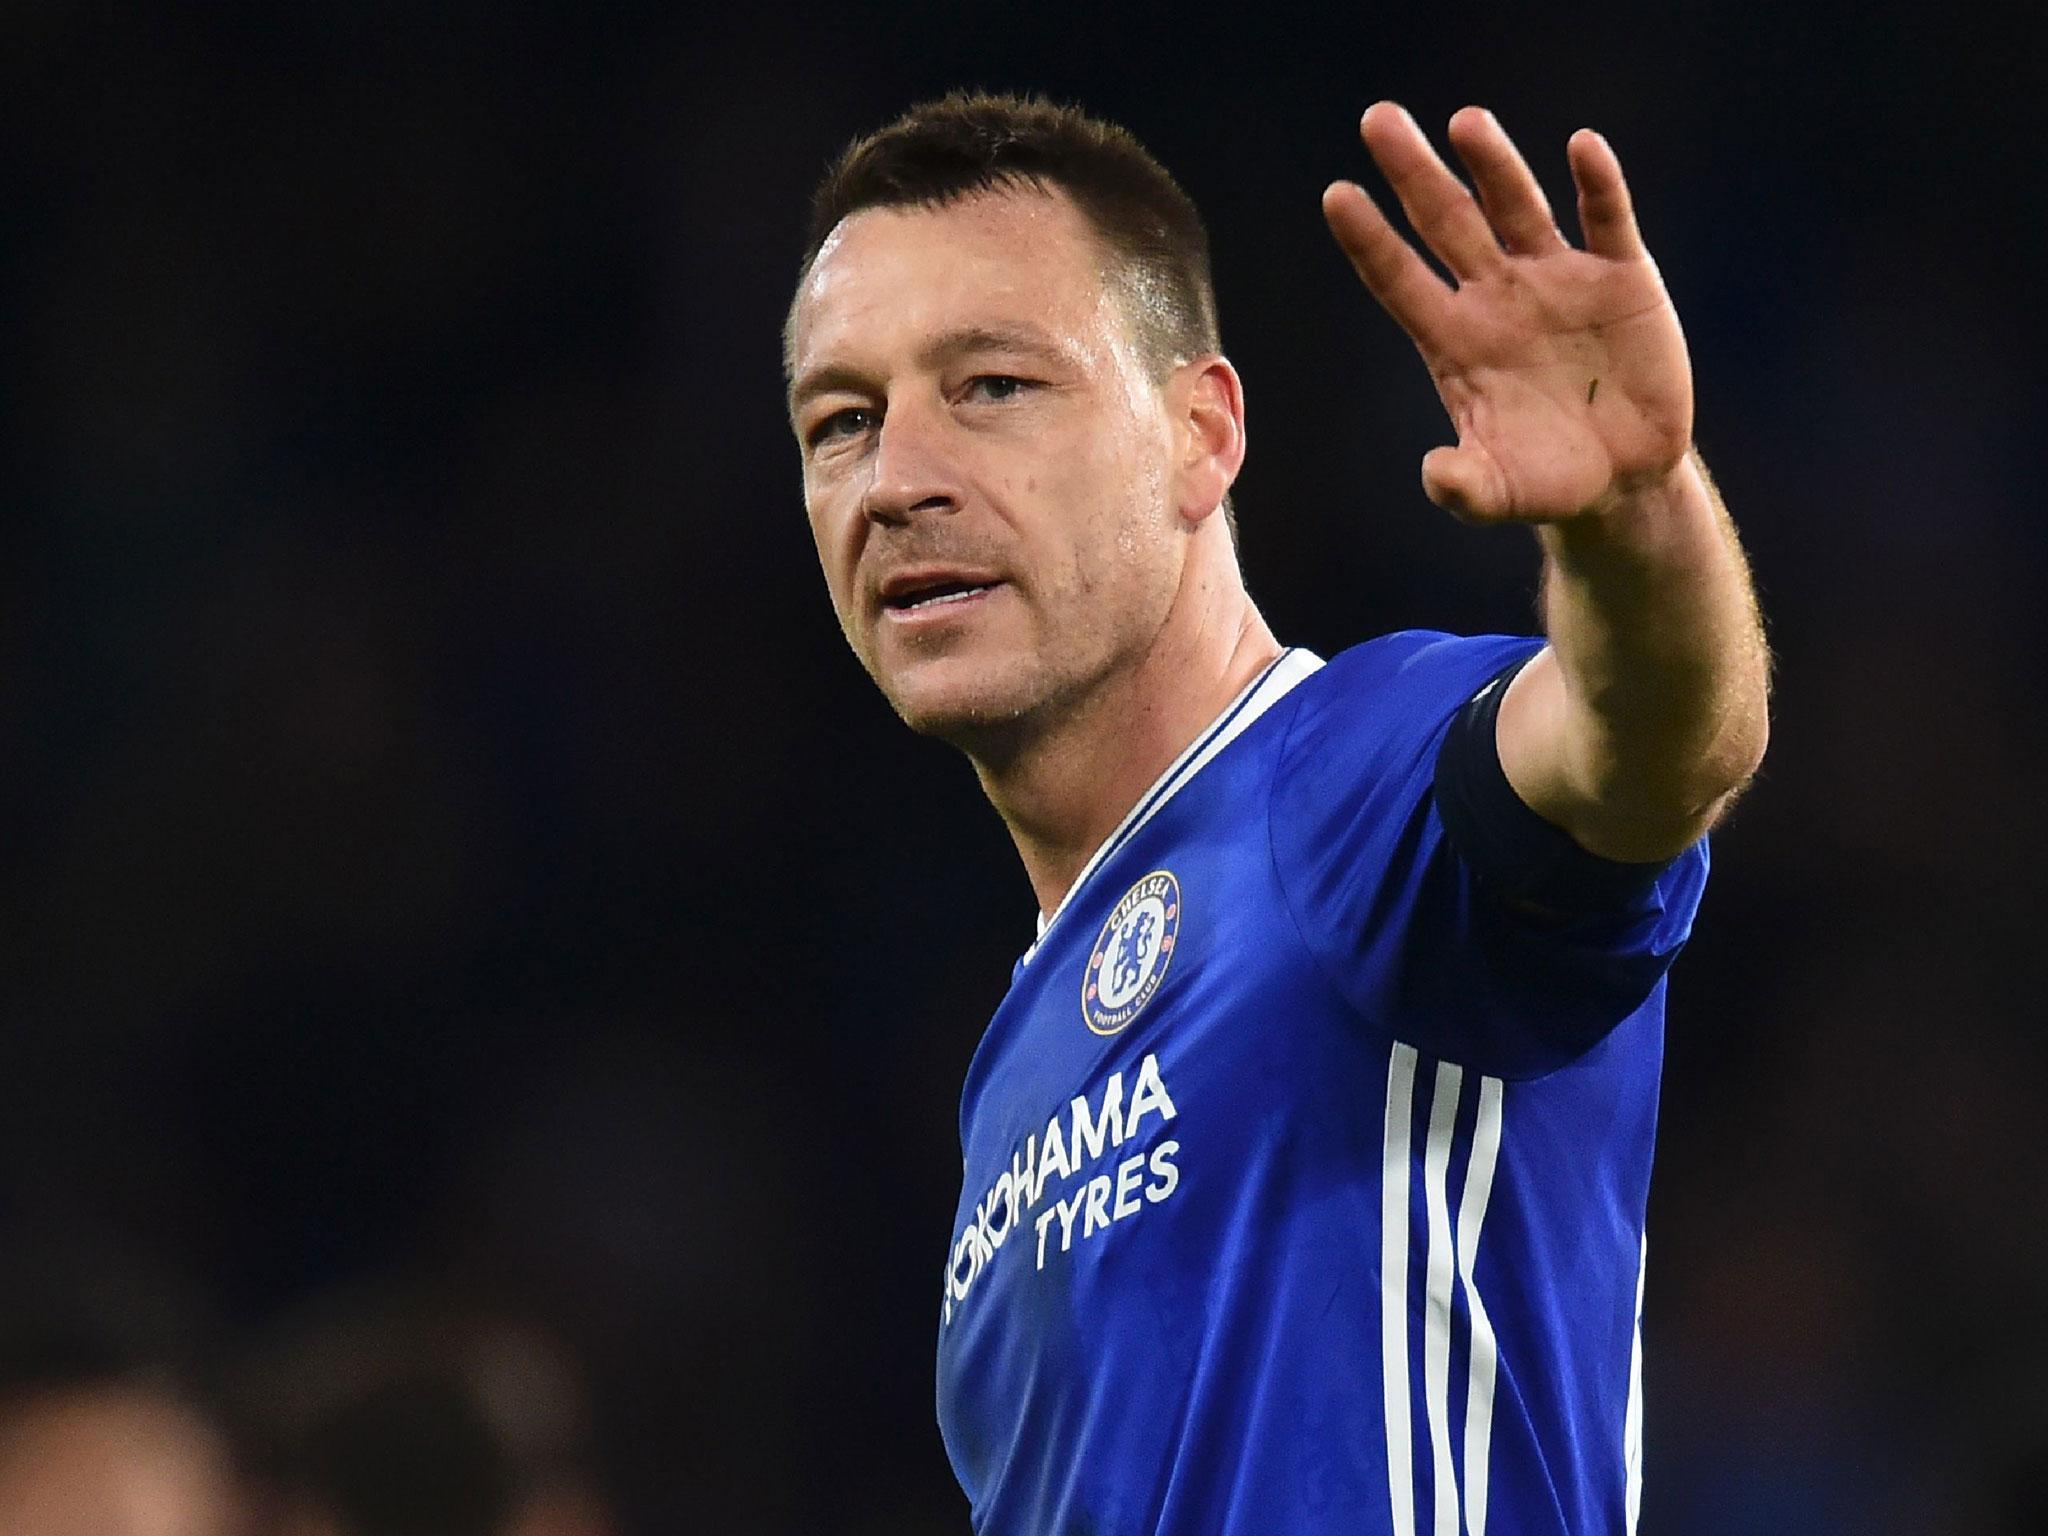 John Terry will leave Chelsea after 22 years this summer